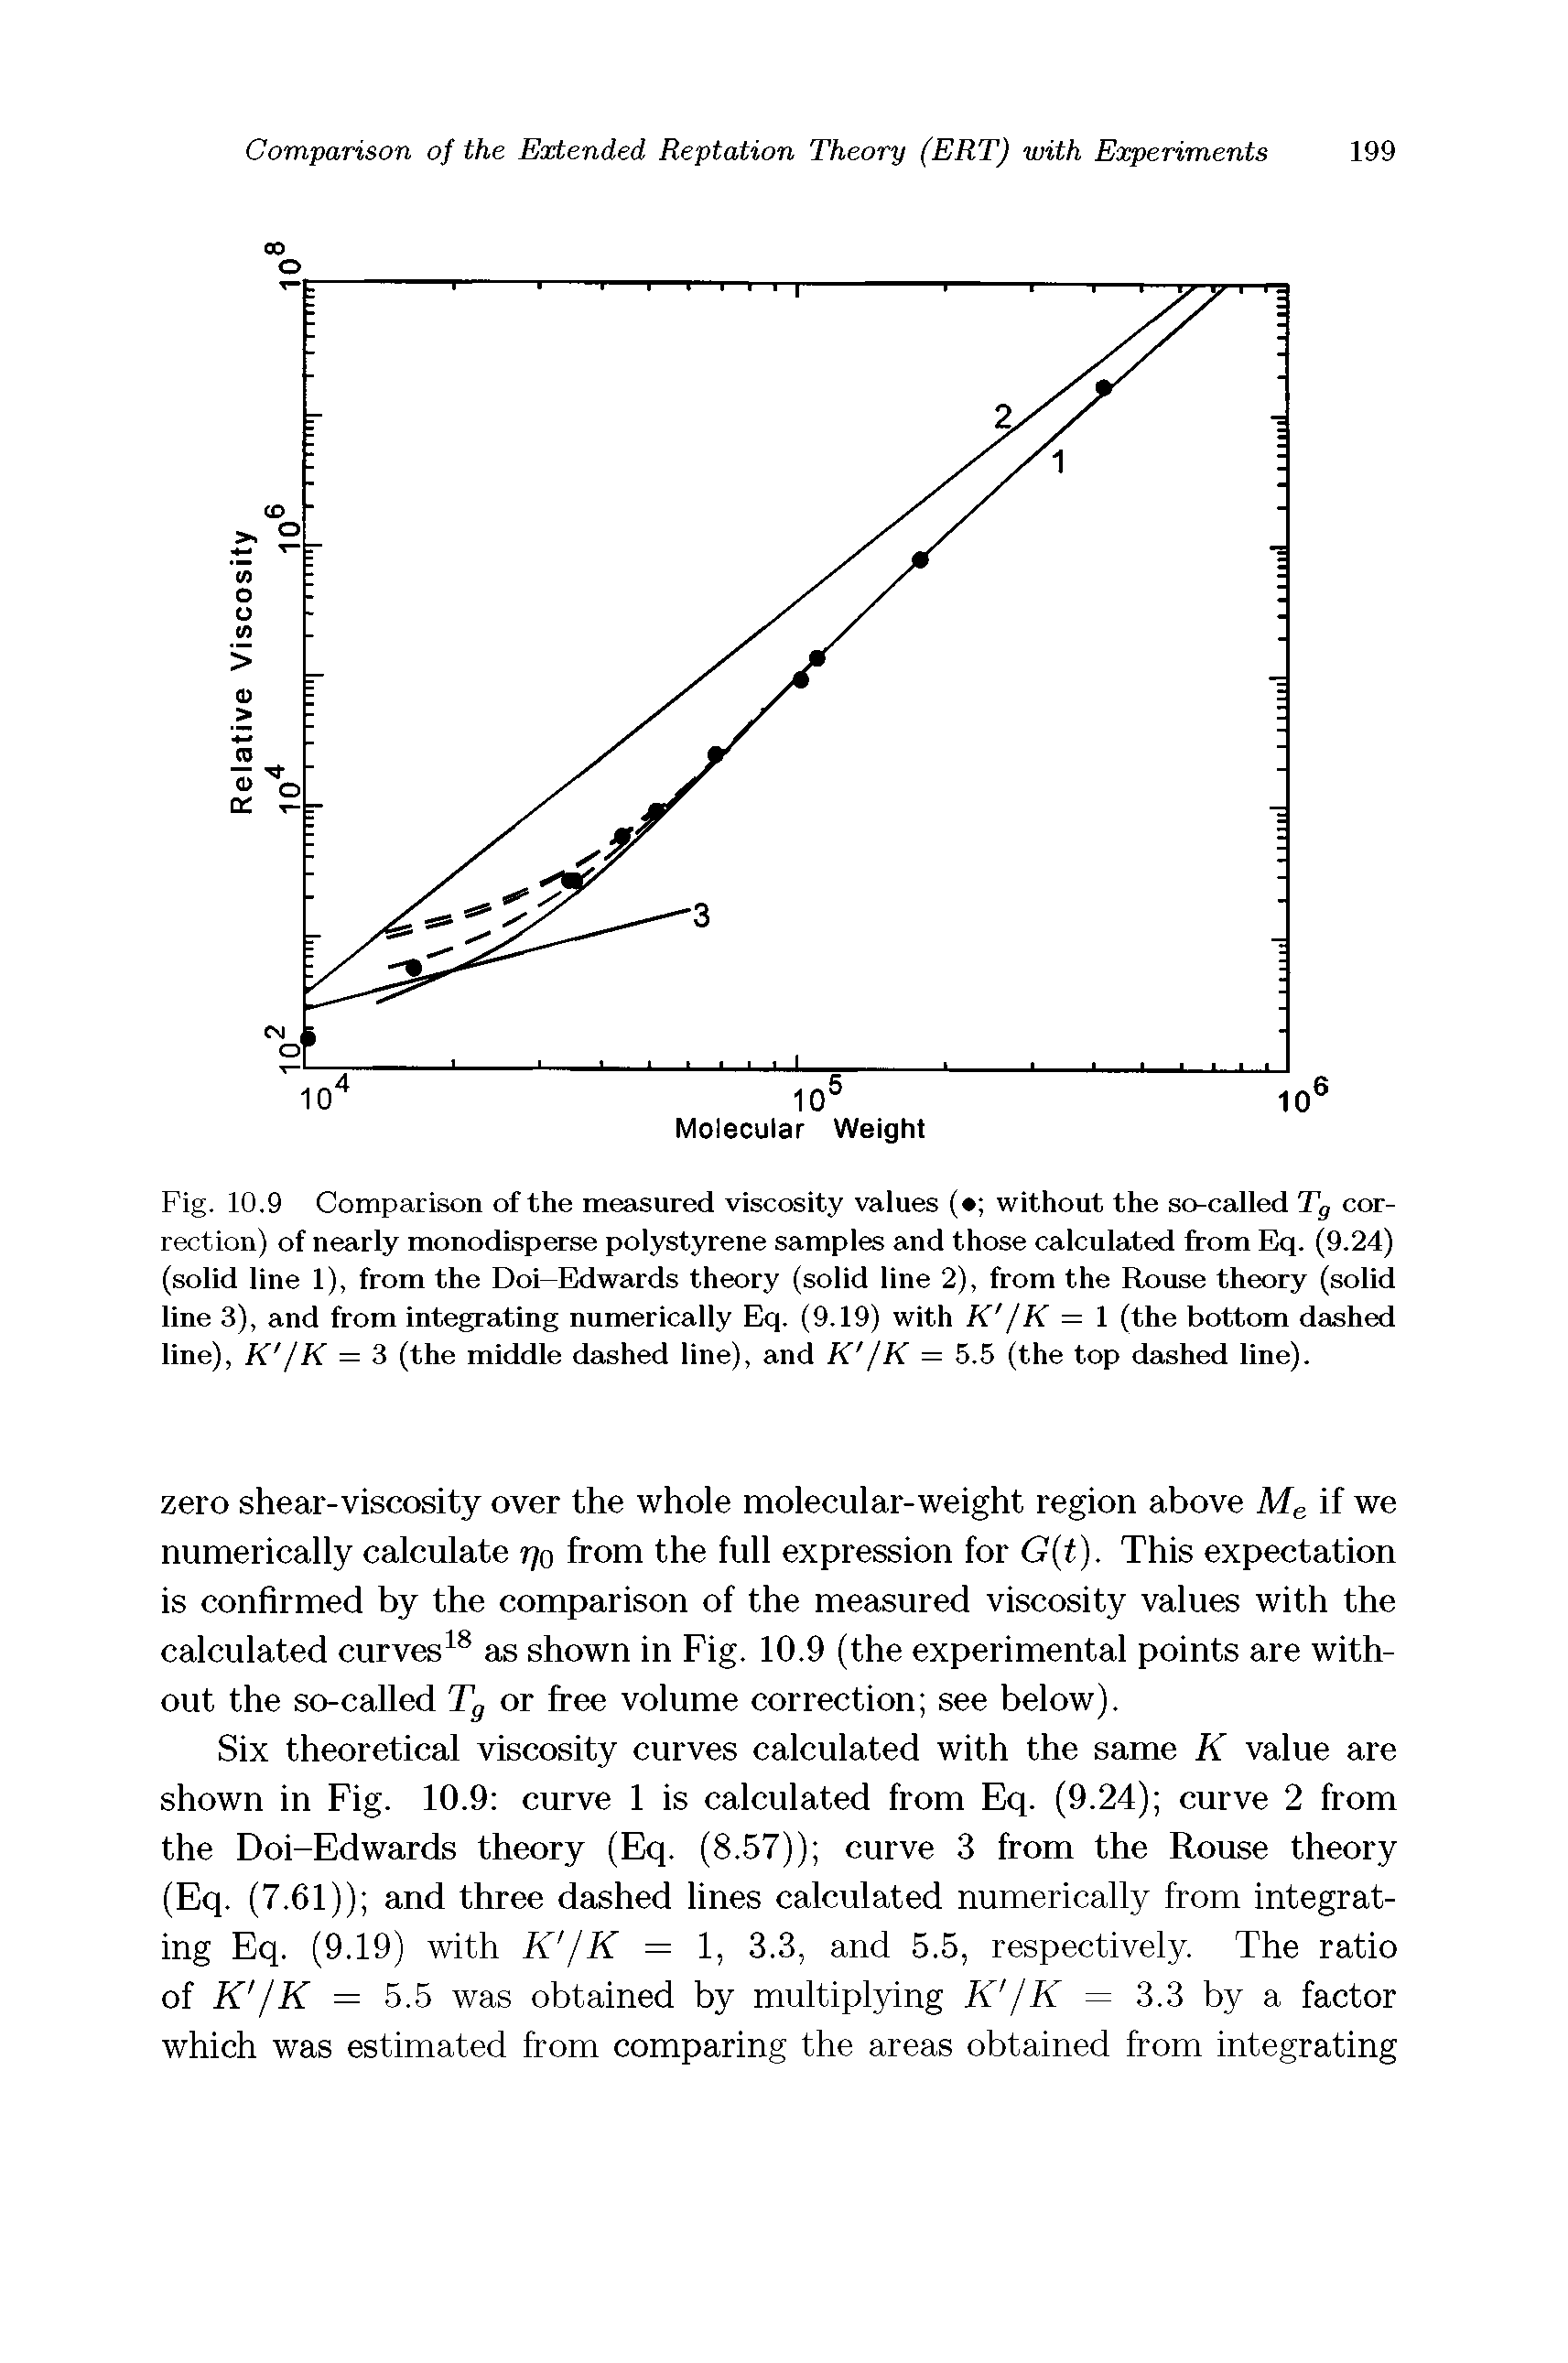 Fig. 10.9 Comparison of the measured viscosity values ( without the so-called Tg correction) of nearly monodisperse polystyrene samples and those calculated from Ekj. (9.24) (solid line 1), from the Doi-Edwards theory (solid line 2), from the Rouse theory (solid line 3), and from integrating numerically Eq. (9.19) with K JK = 1 (the bottom dashed line), K fK = 3 (the middle dashed line), and K /K = 5.5 (the top dashed line).